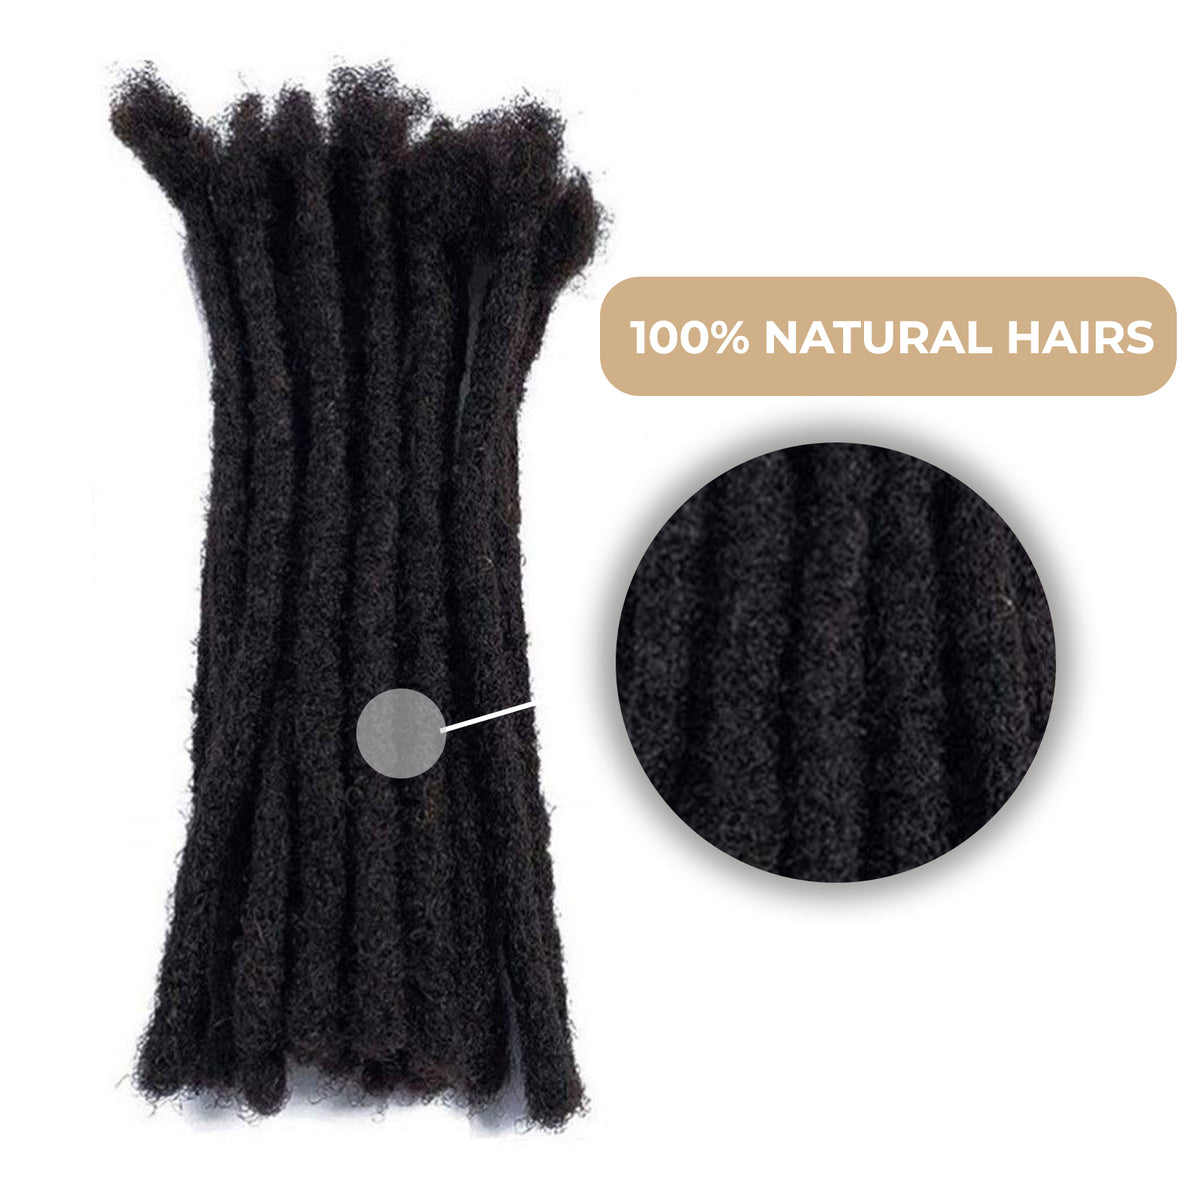 100% Human Hair Dreadlock Extensions 8 inch 5 Strands Handmade Natural Loc Extensions Human Hair Bundle Dreads Extensions For Woman & Men Can Be Dyed/Bleached  (8 Inch 5 Strands, 0.4cm Natural Black)